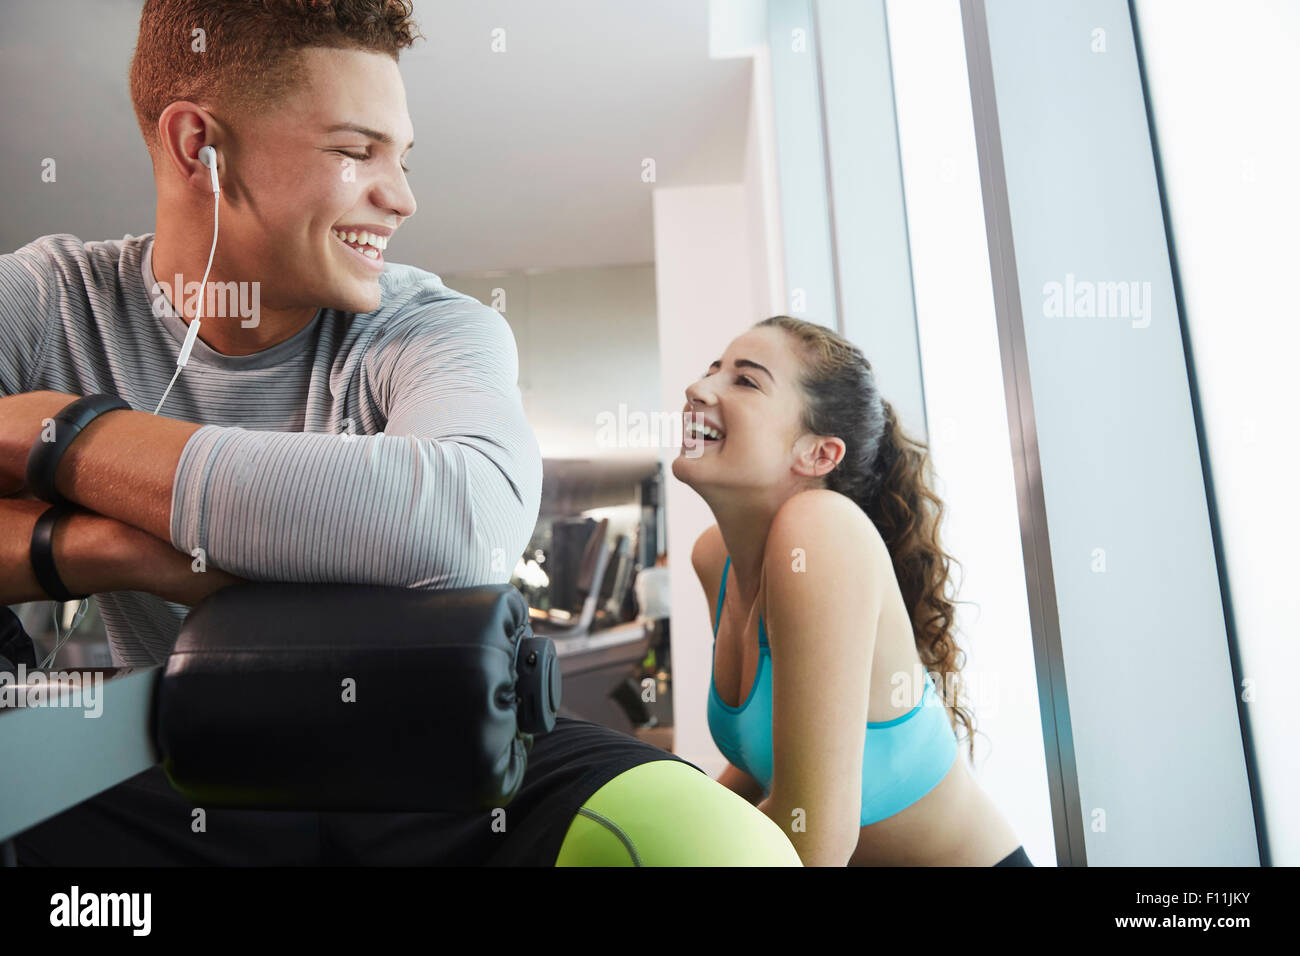 Smiling couple laughing in gym Stock Photo